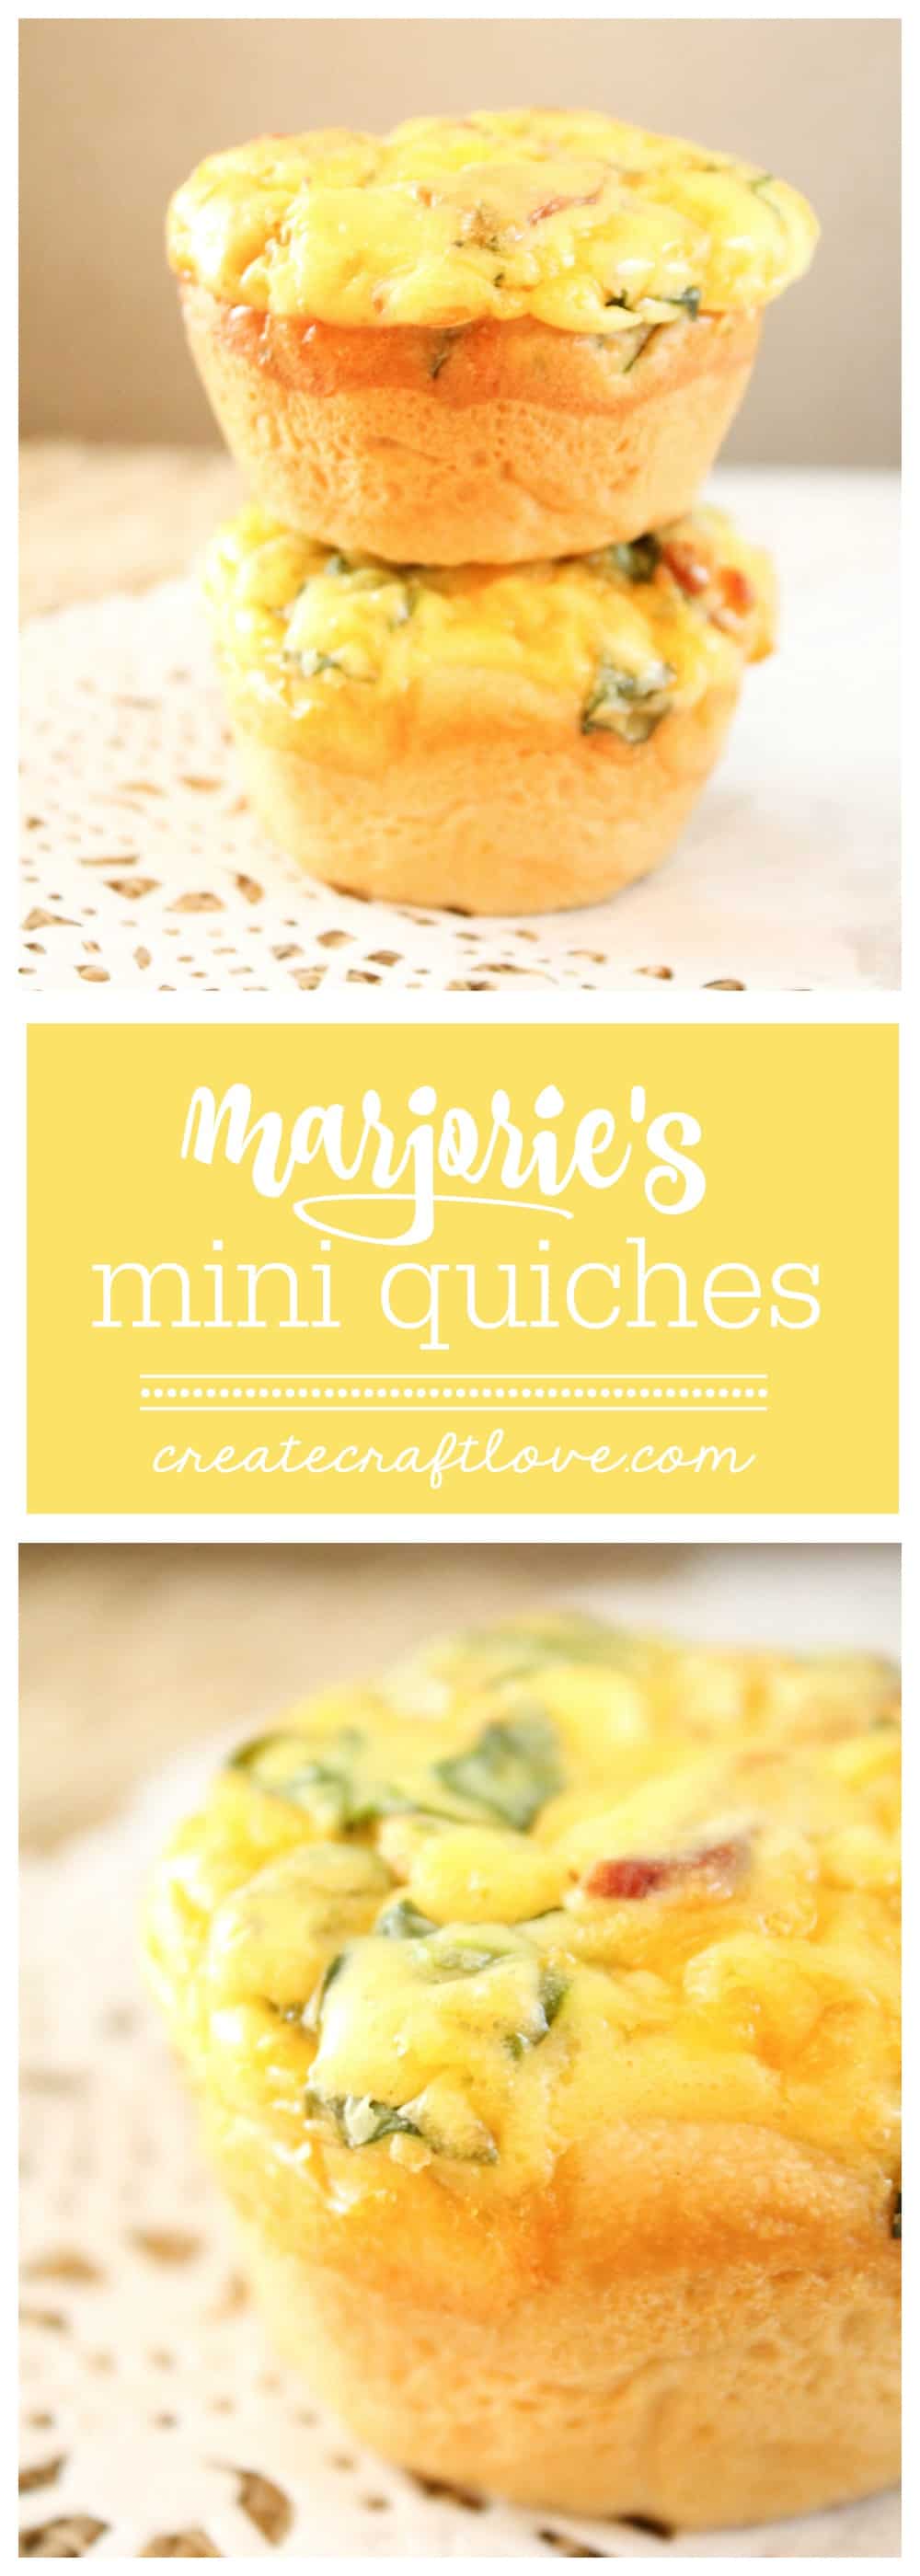 Marjorie's Mini Quiches are the perfect make ahead breakfast for potlucks and busy weeks!